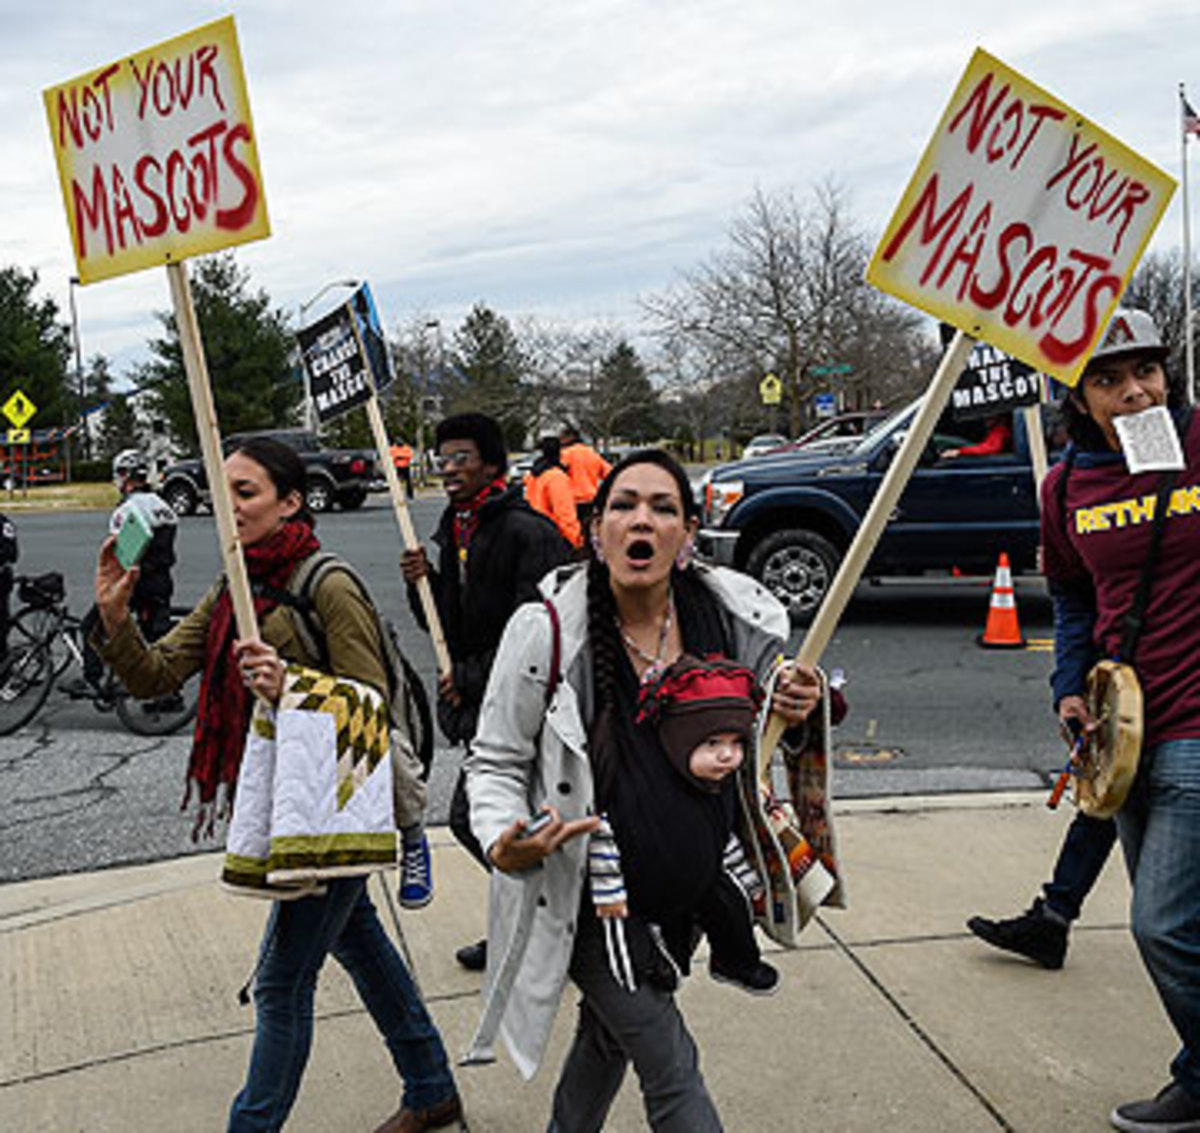 The largest anti-nickname protest was held before the Week 17 finale outside FedEx Field. (Toni L. Sandys/Getty Images)